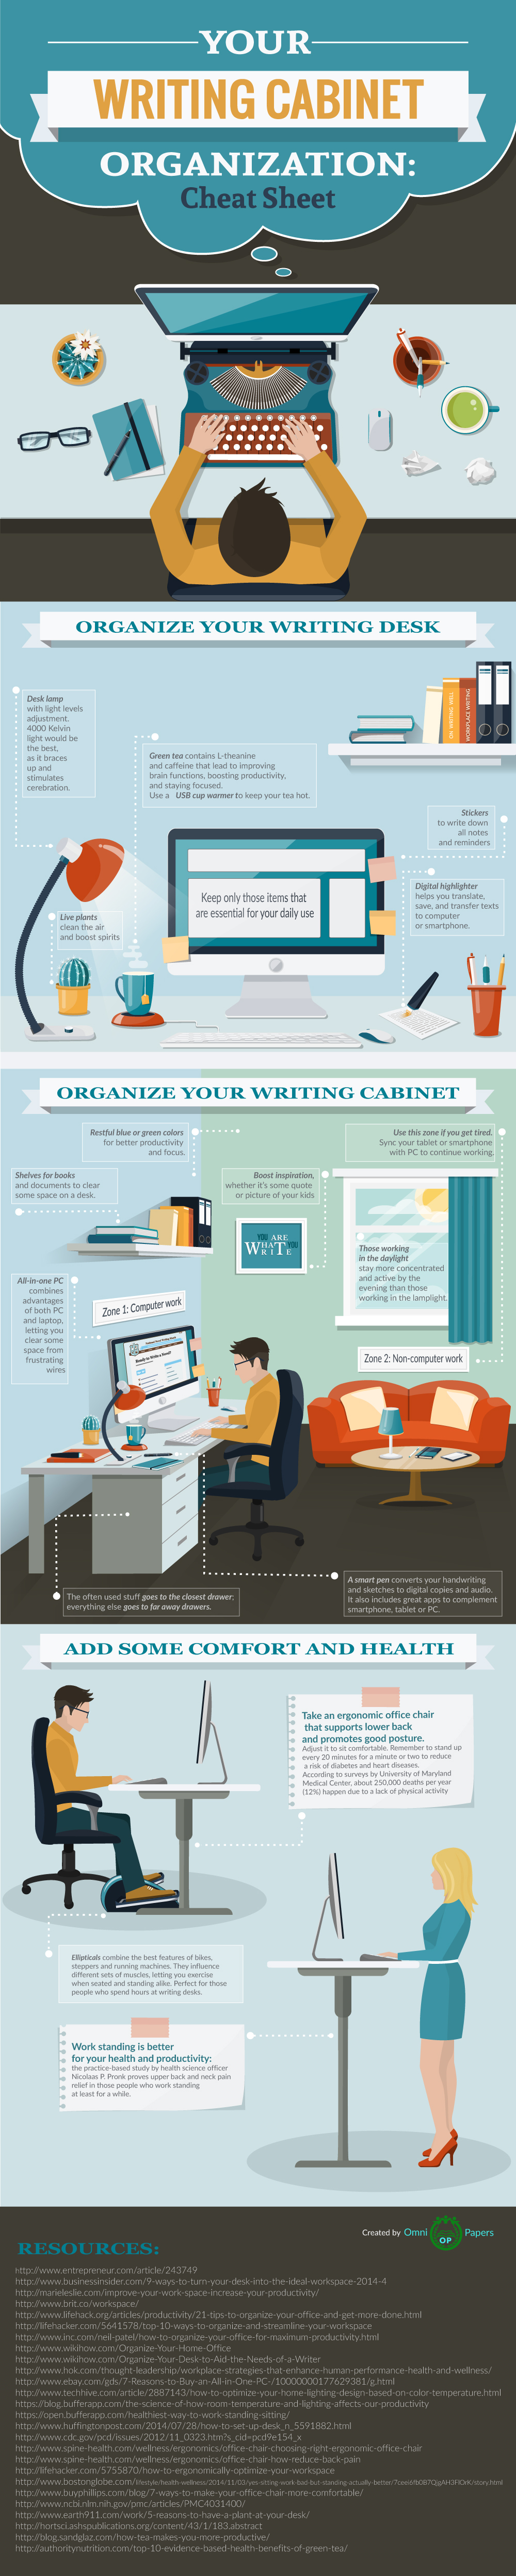 Ways to Organize Your Writing Cabinet